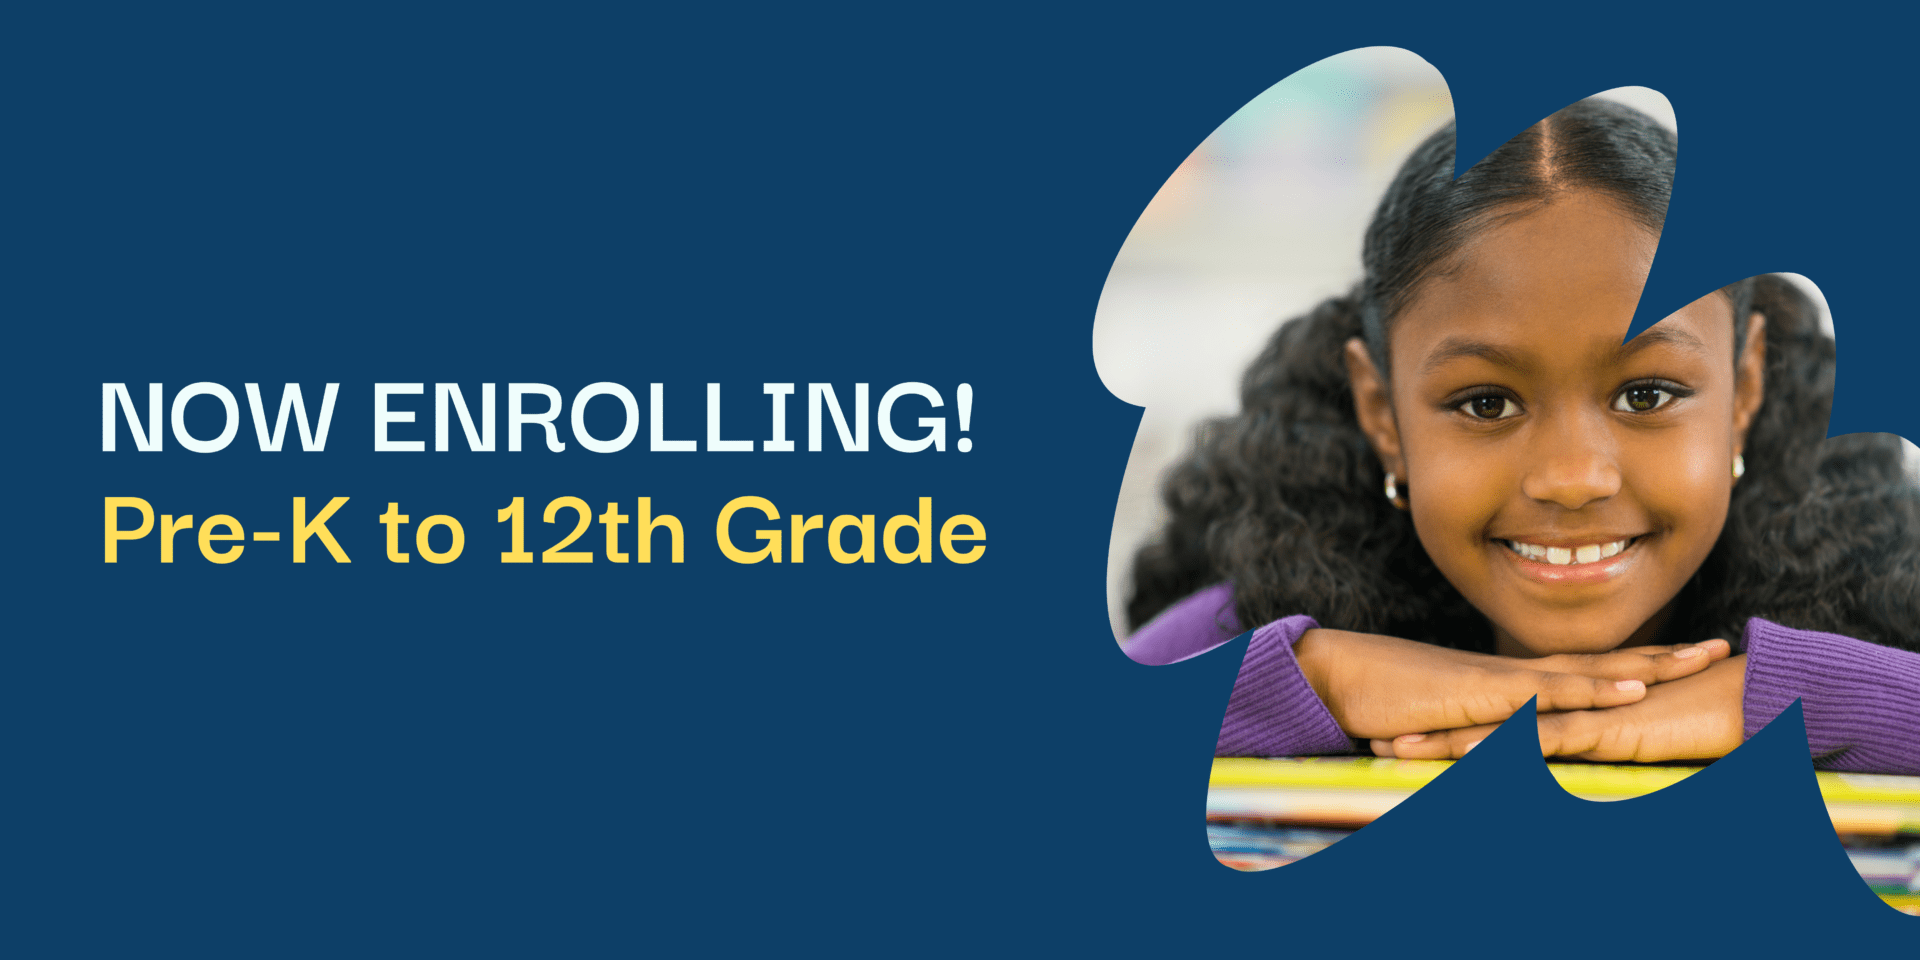 School enrollment advertisement featuring a smiling young student with text 'now enrolling! pre-k to 12th grade' on a blue background.